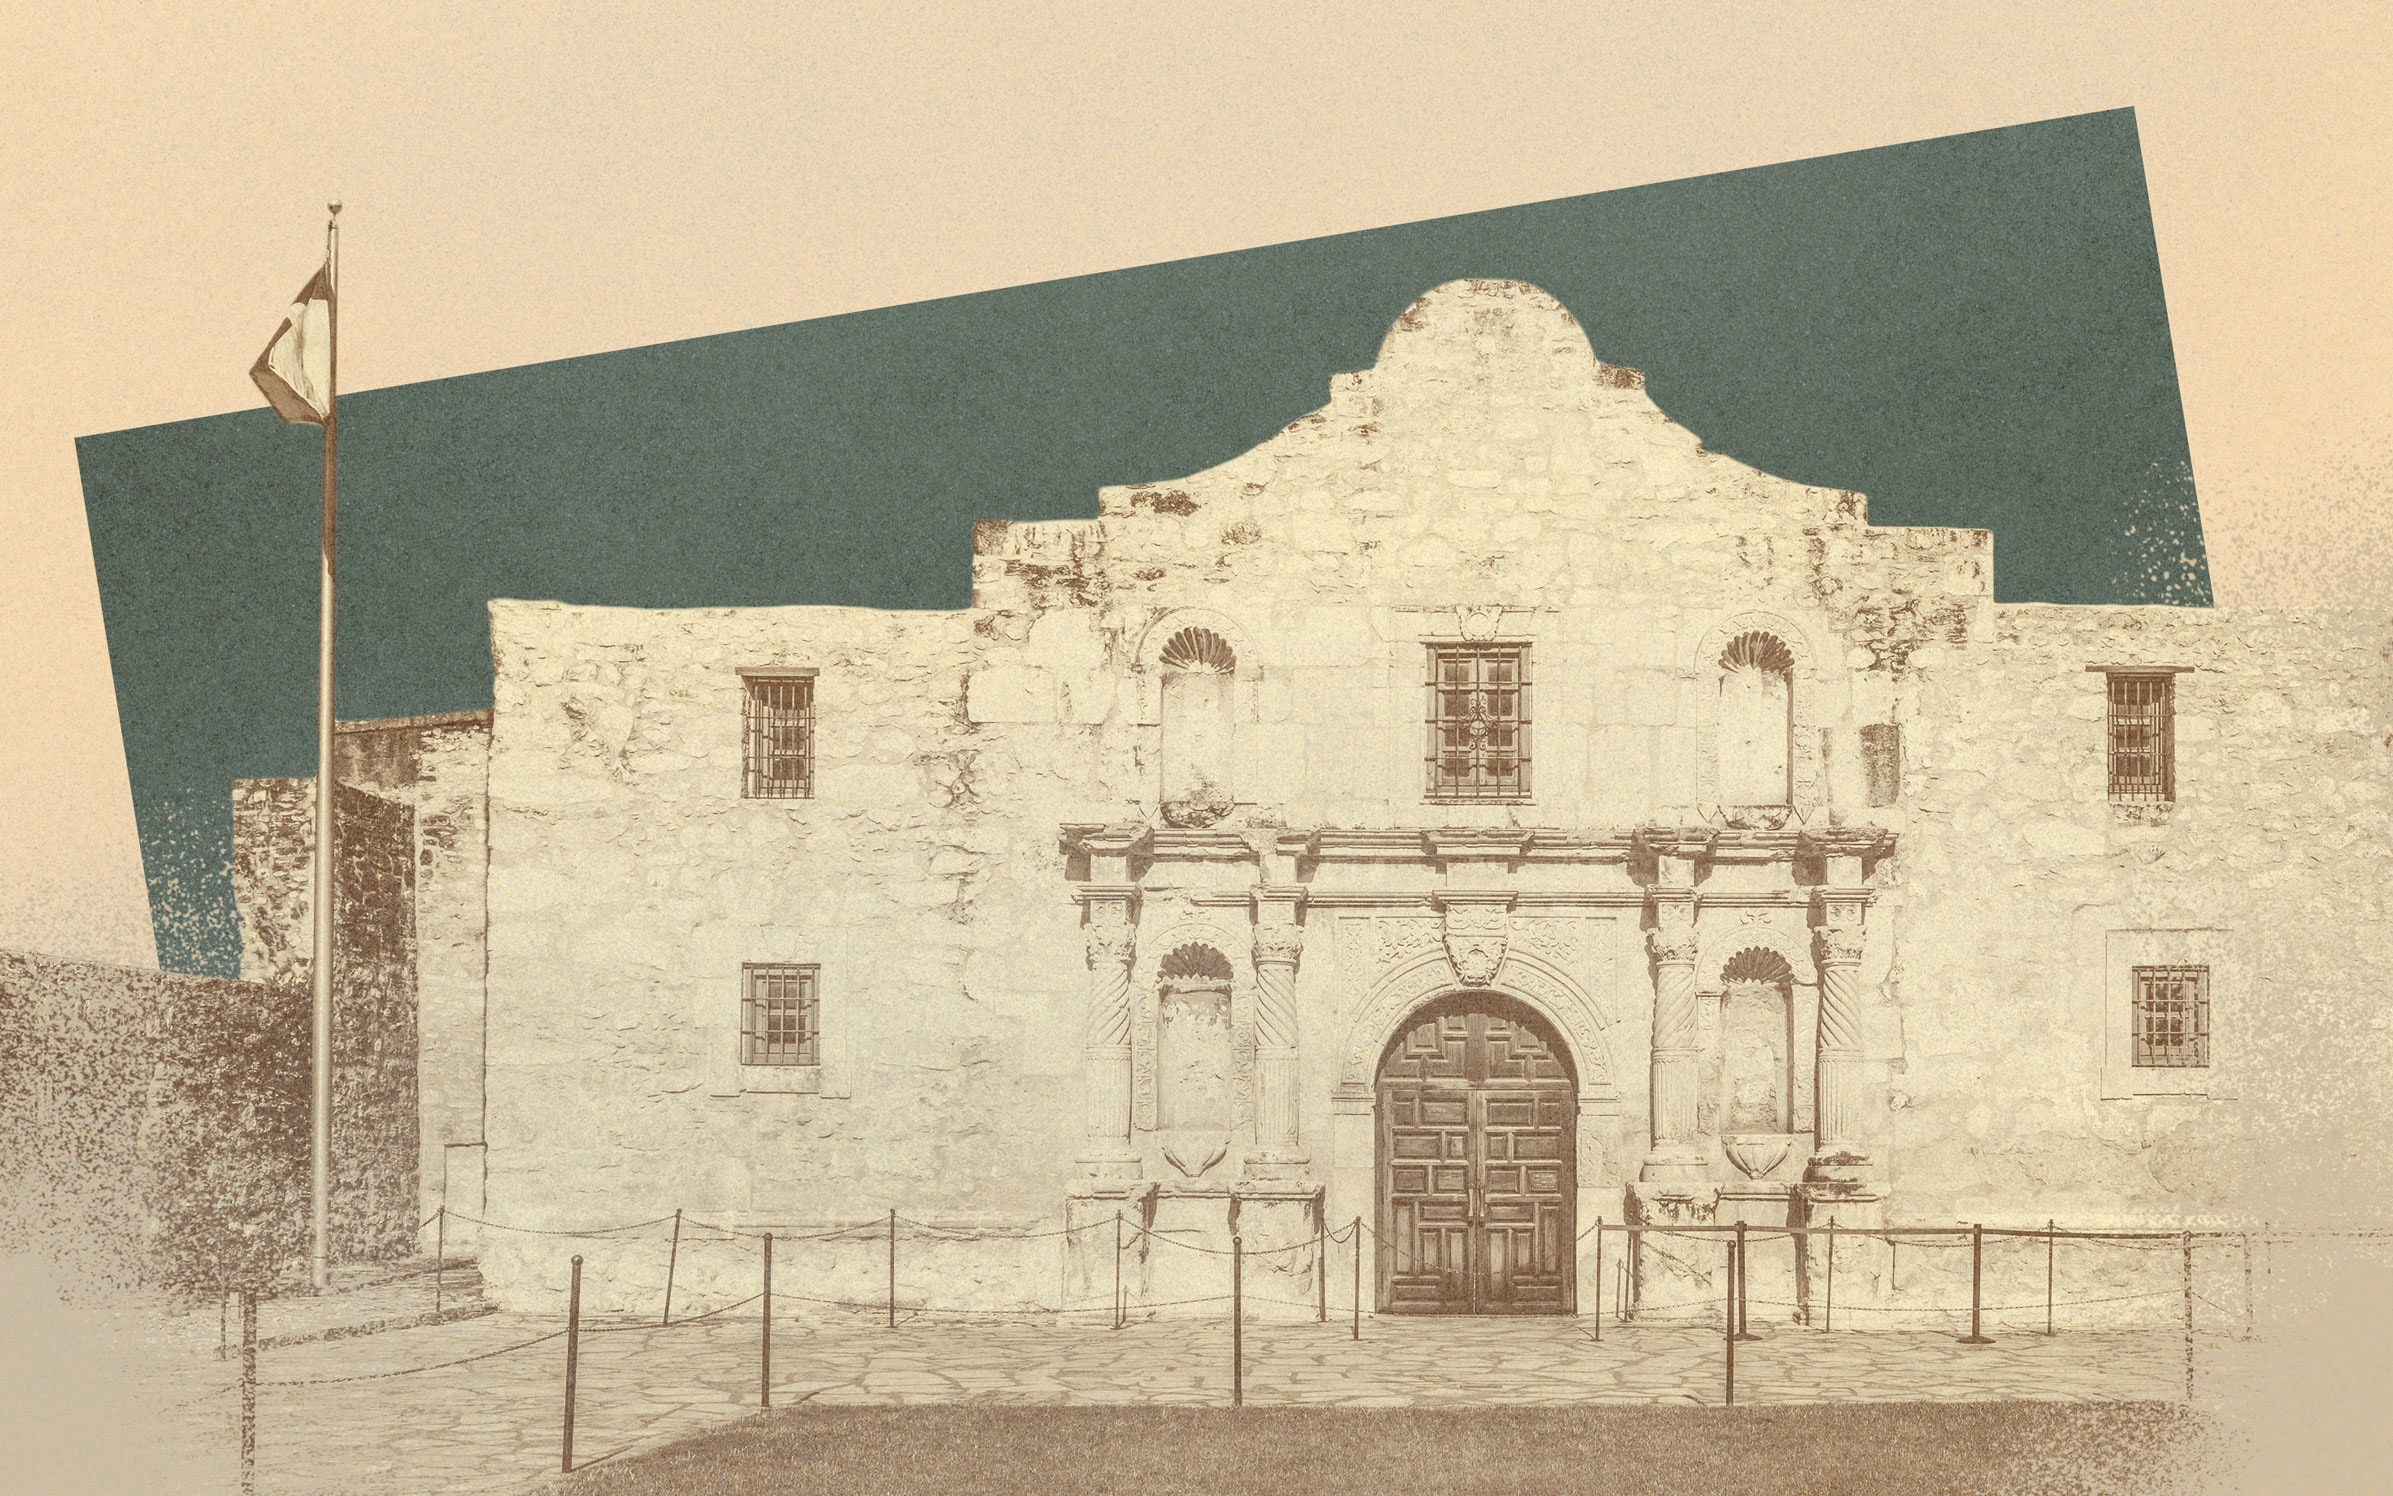 where in texas did william travis commander of the alamo come from